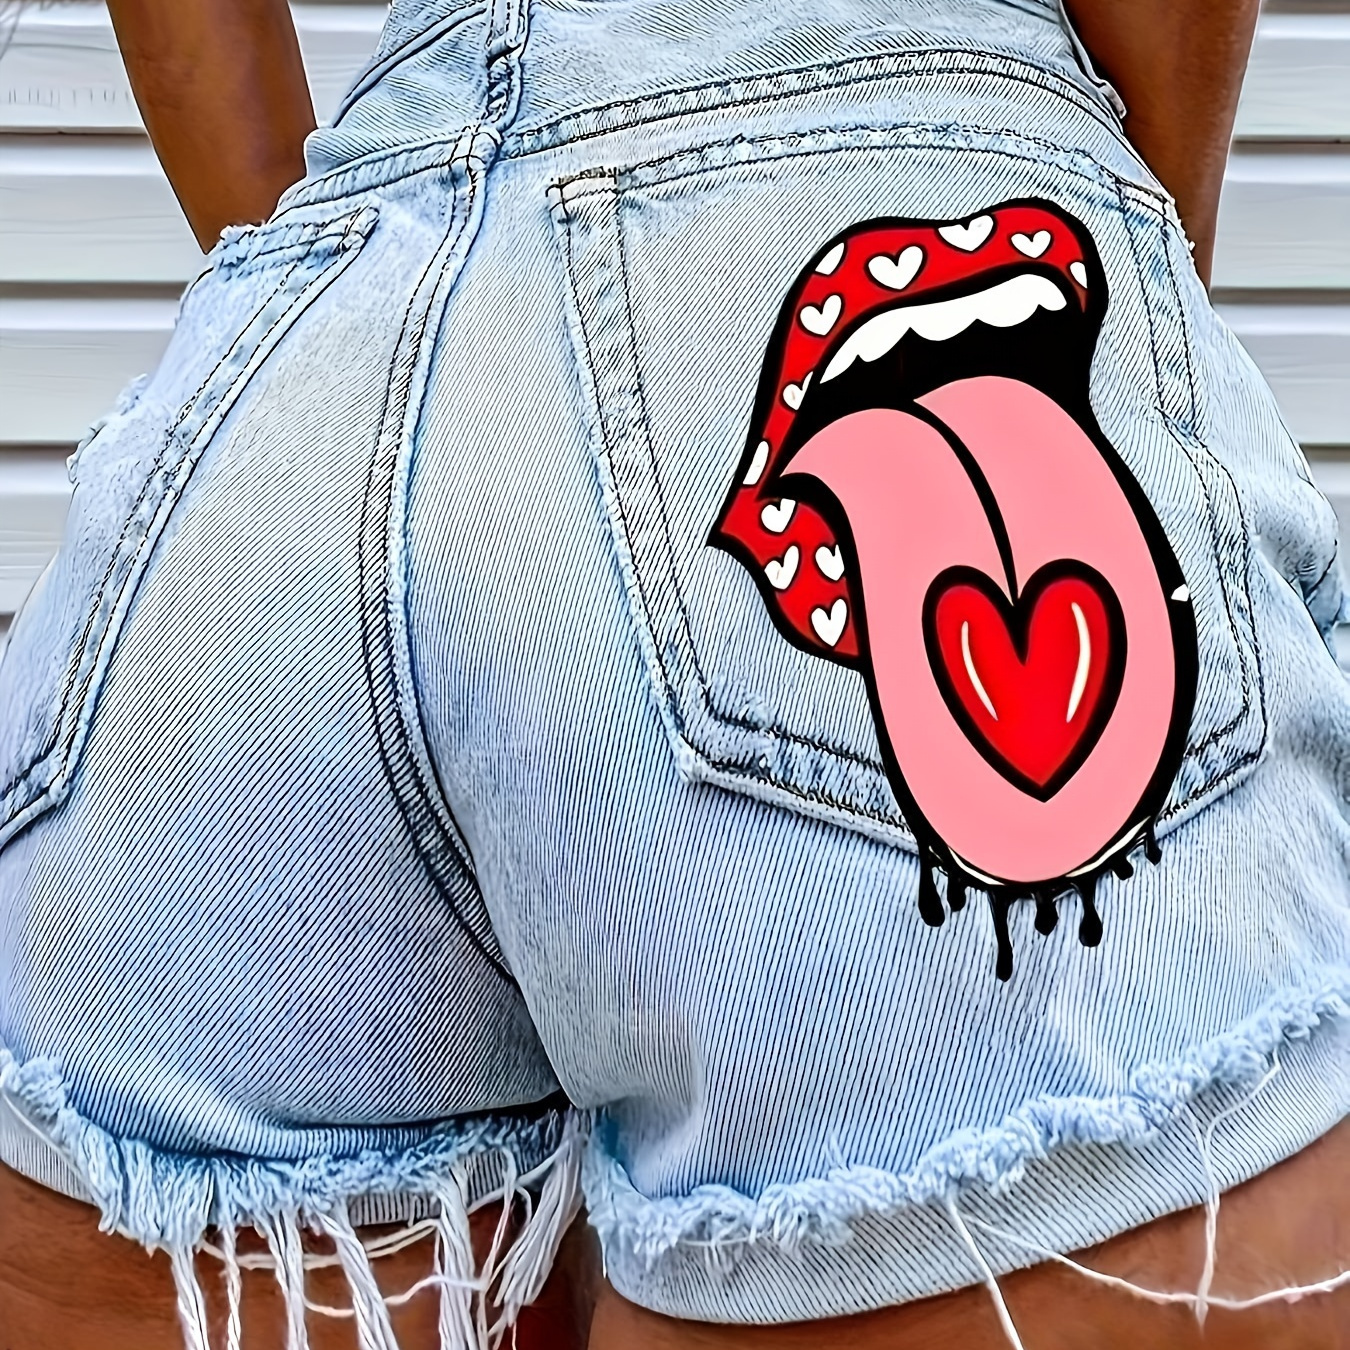 

Women's Casual Heart Red Lips Graphic Single-breasted High-waisted Denim Shorts, Tongue Print With Distressed Detail, Light Wash, Loose Fit Jean Shorts